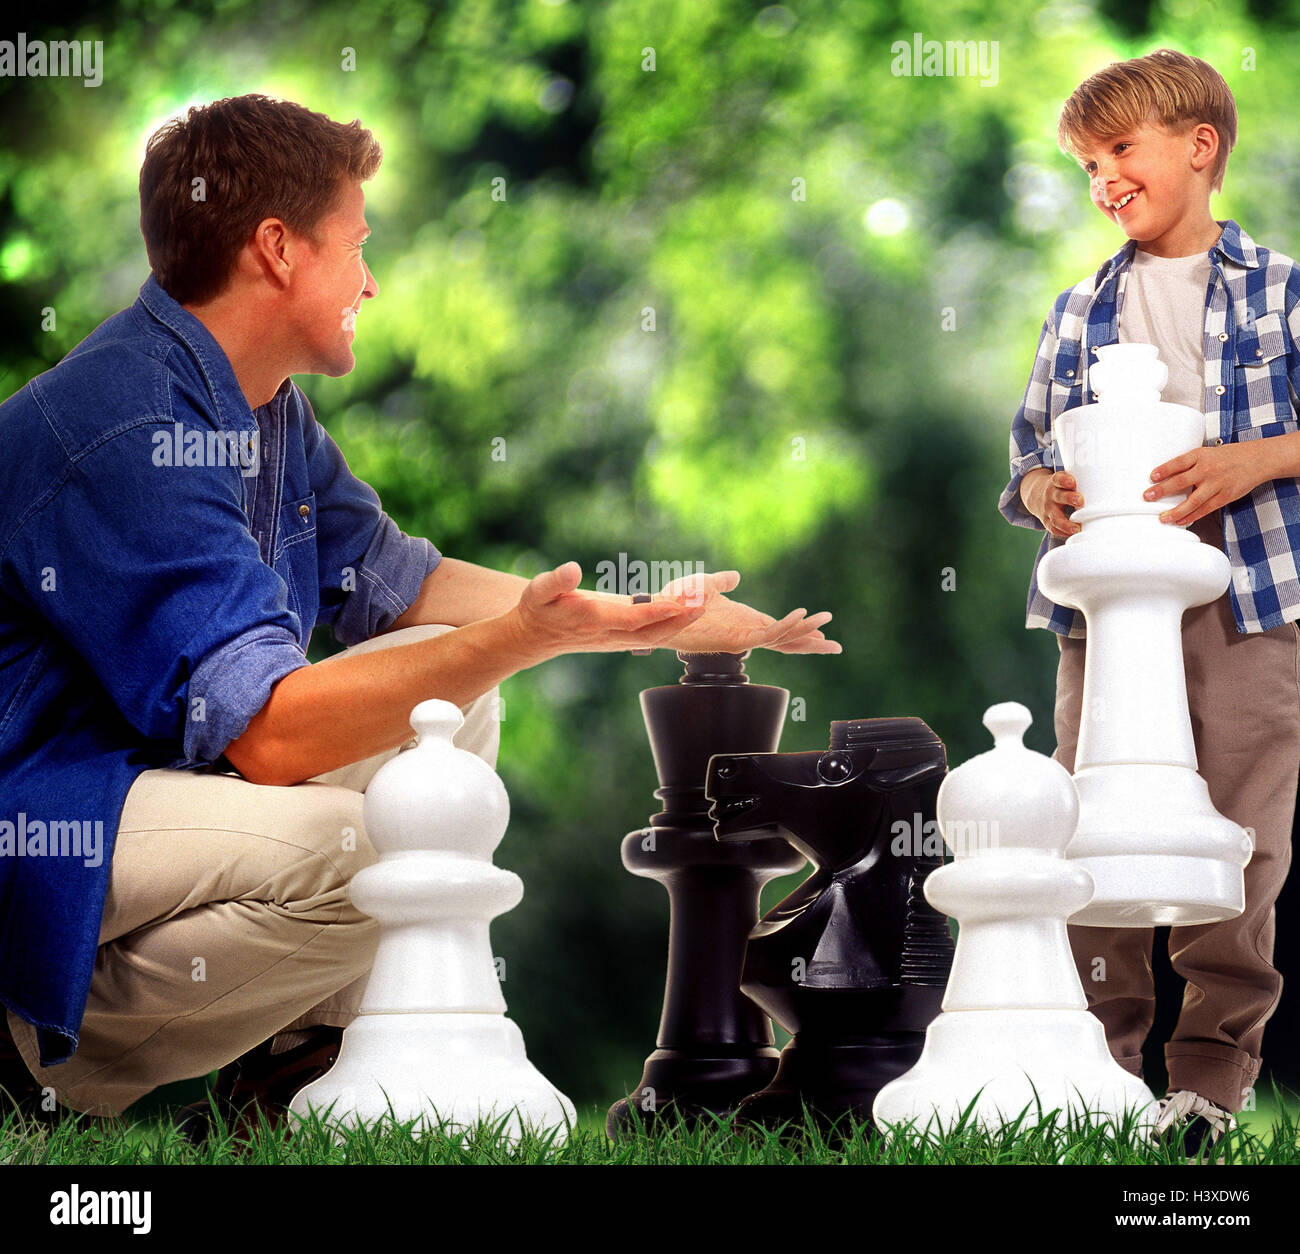 Father, son, chess pieces, oversized, game, meadow Families, man, child, boy, play, park, chess, chess, 'chessboard tactics', leisure time, outside, outsize, strategy game, manoeuvre, game figures, strategy, Stock Photo